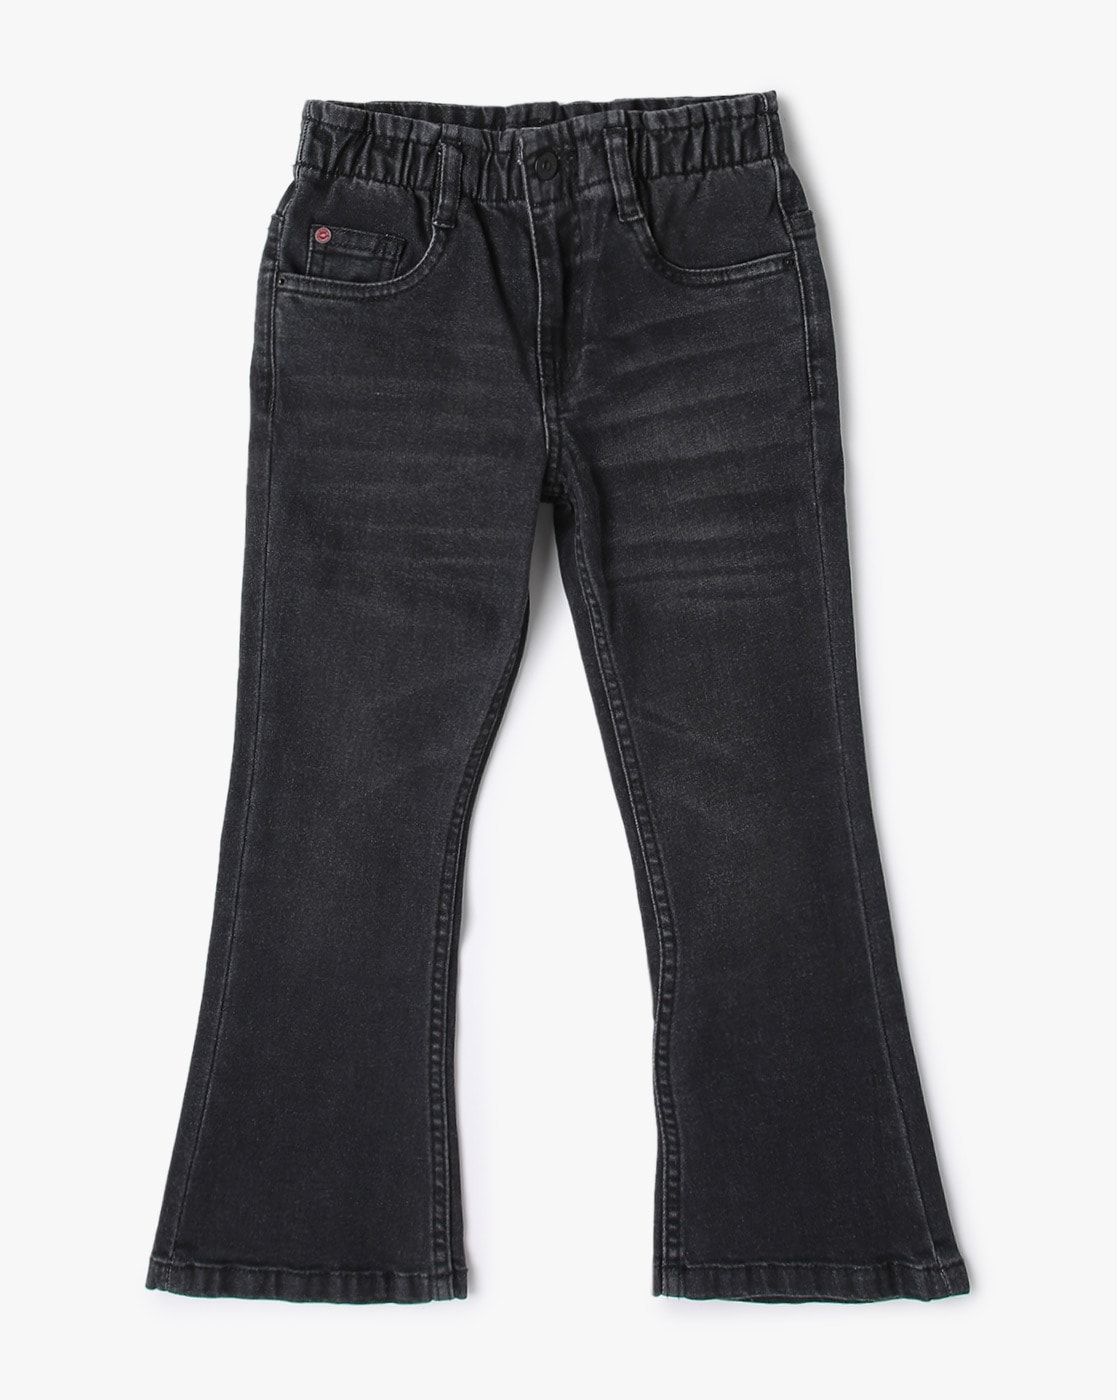 Black Plain Bootcut Jeans Girls, Stretchable at Rs 550/piece in Faridabad